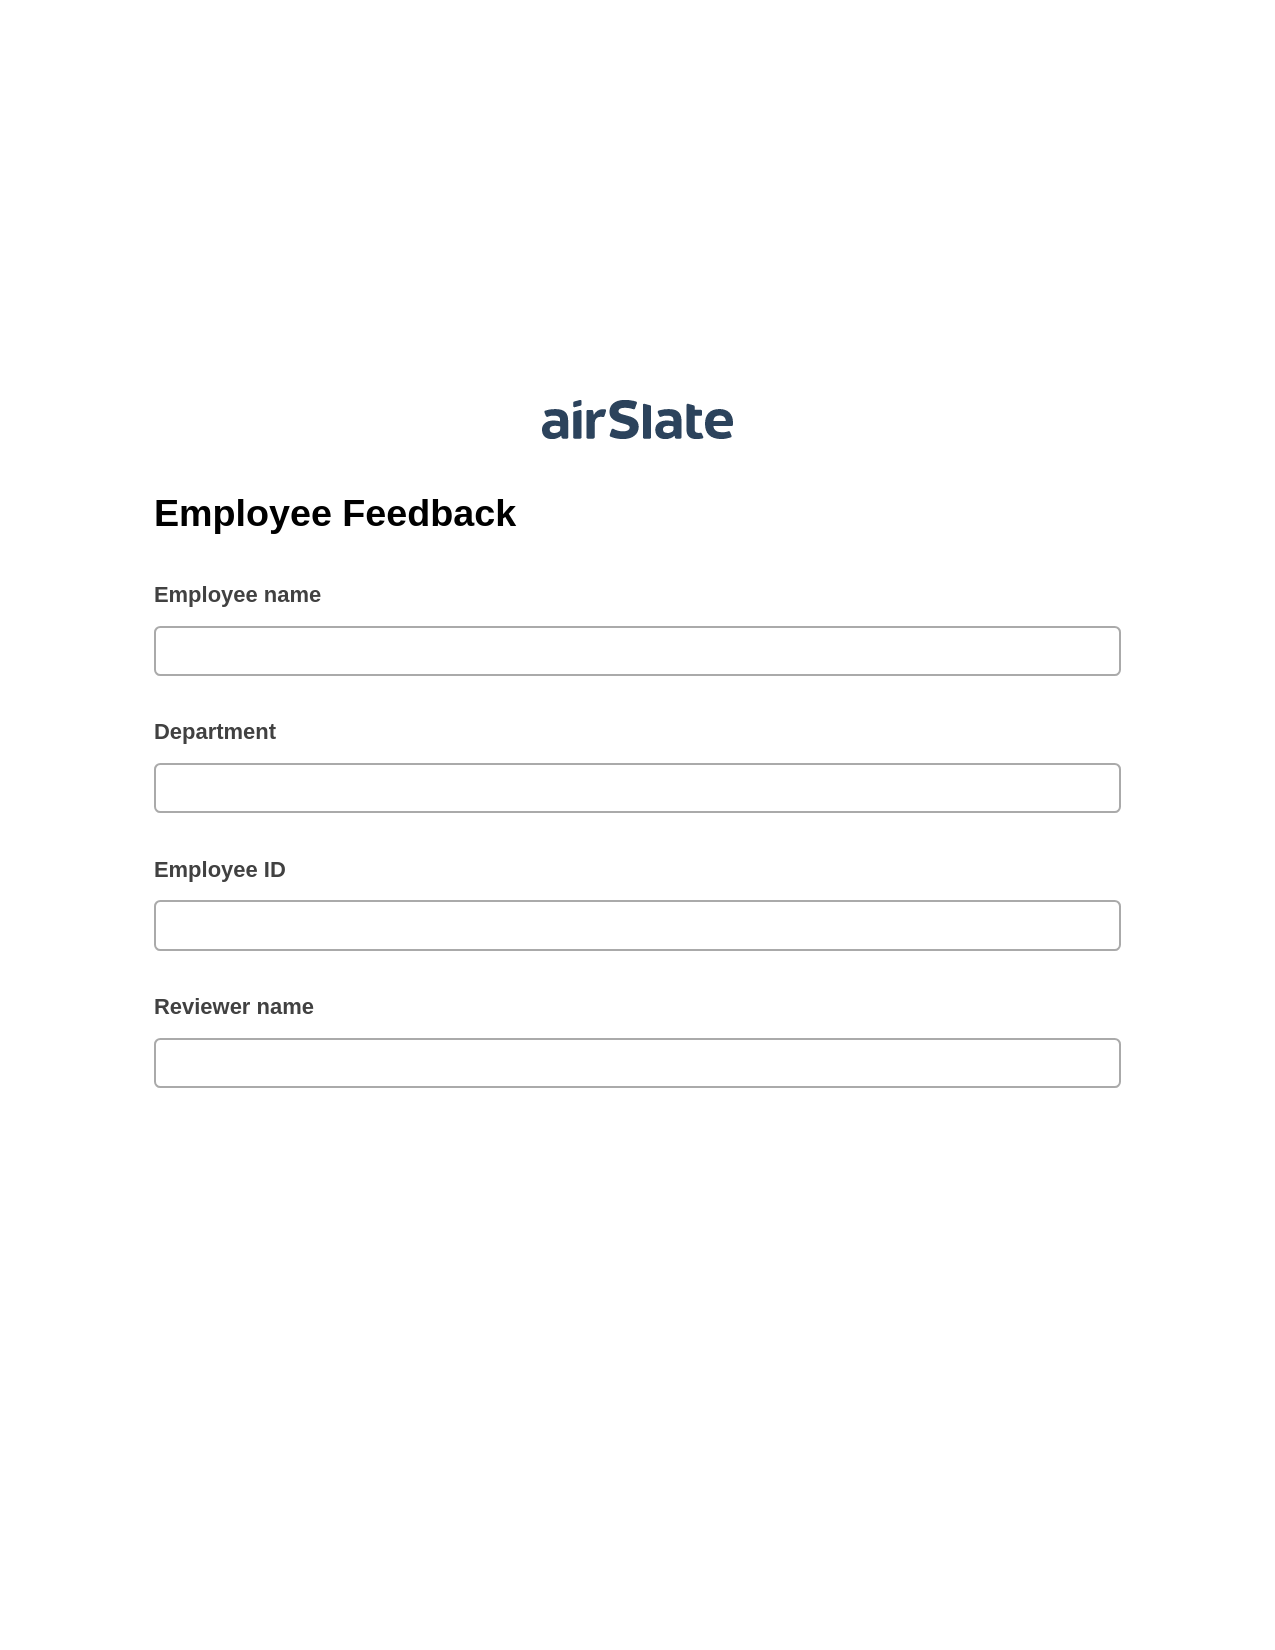 Multirole Employee Feedback Pre-fill from CSV File Bot, Remove Tags From Slate Bot, Post-finish Document Bot